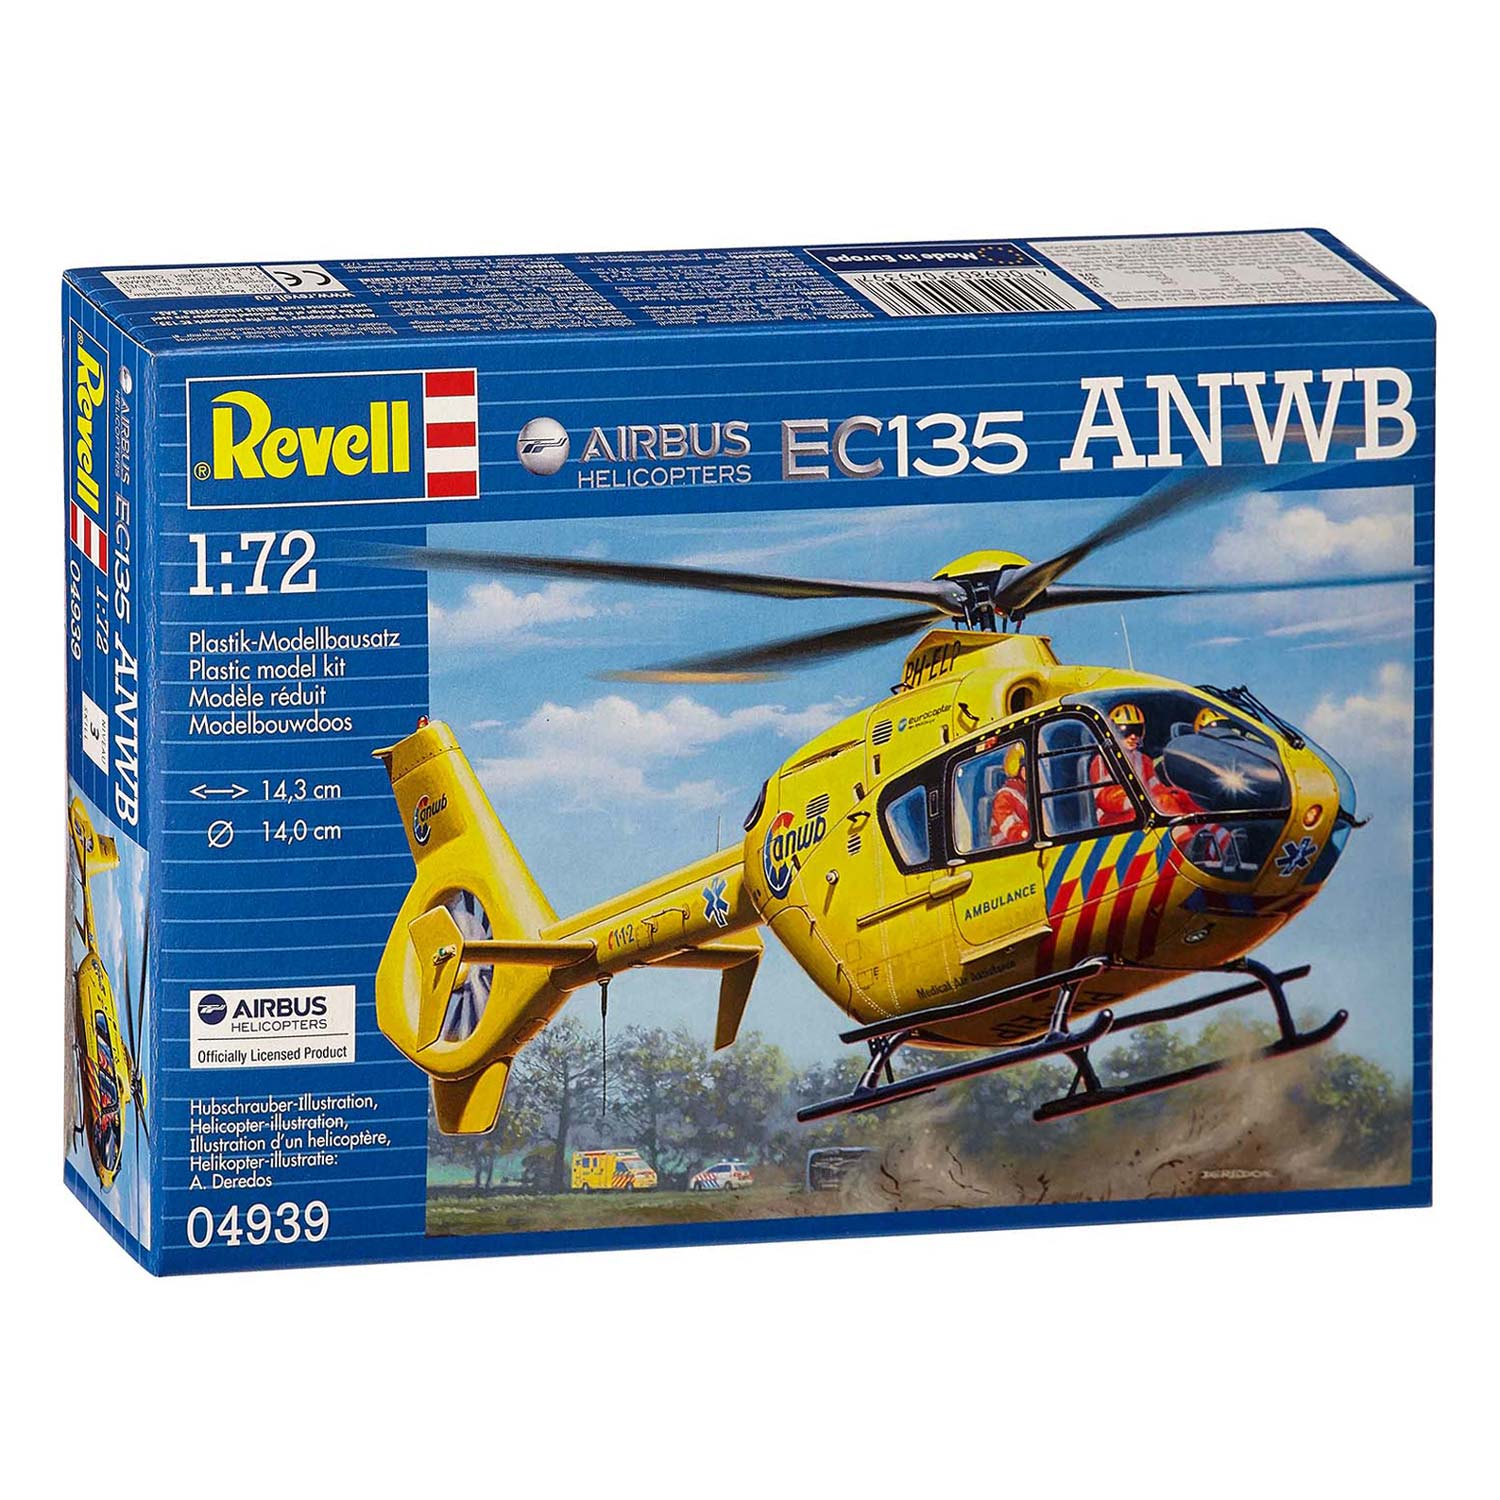 Revell Airbus Helicopter EC135 ANWB Thimble Toys